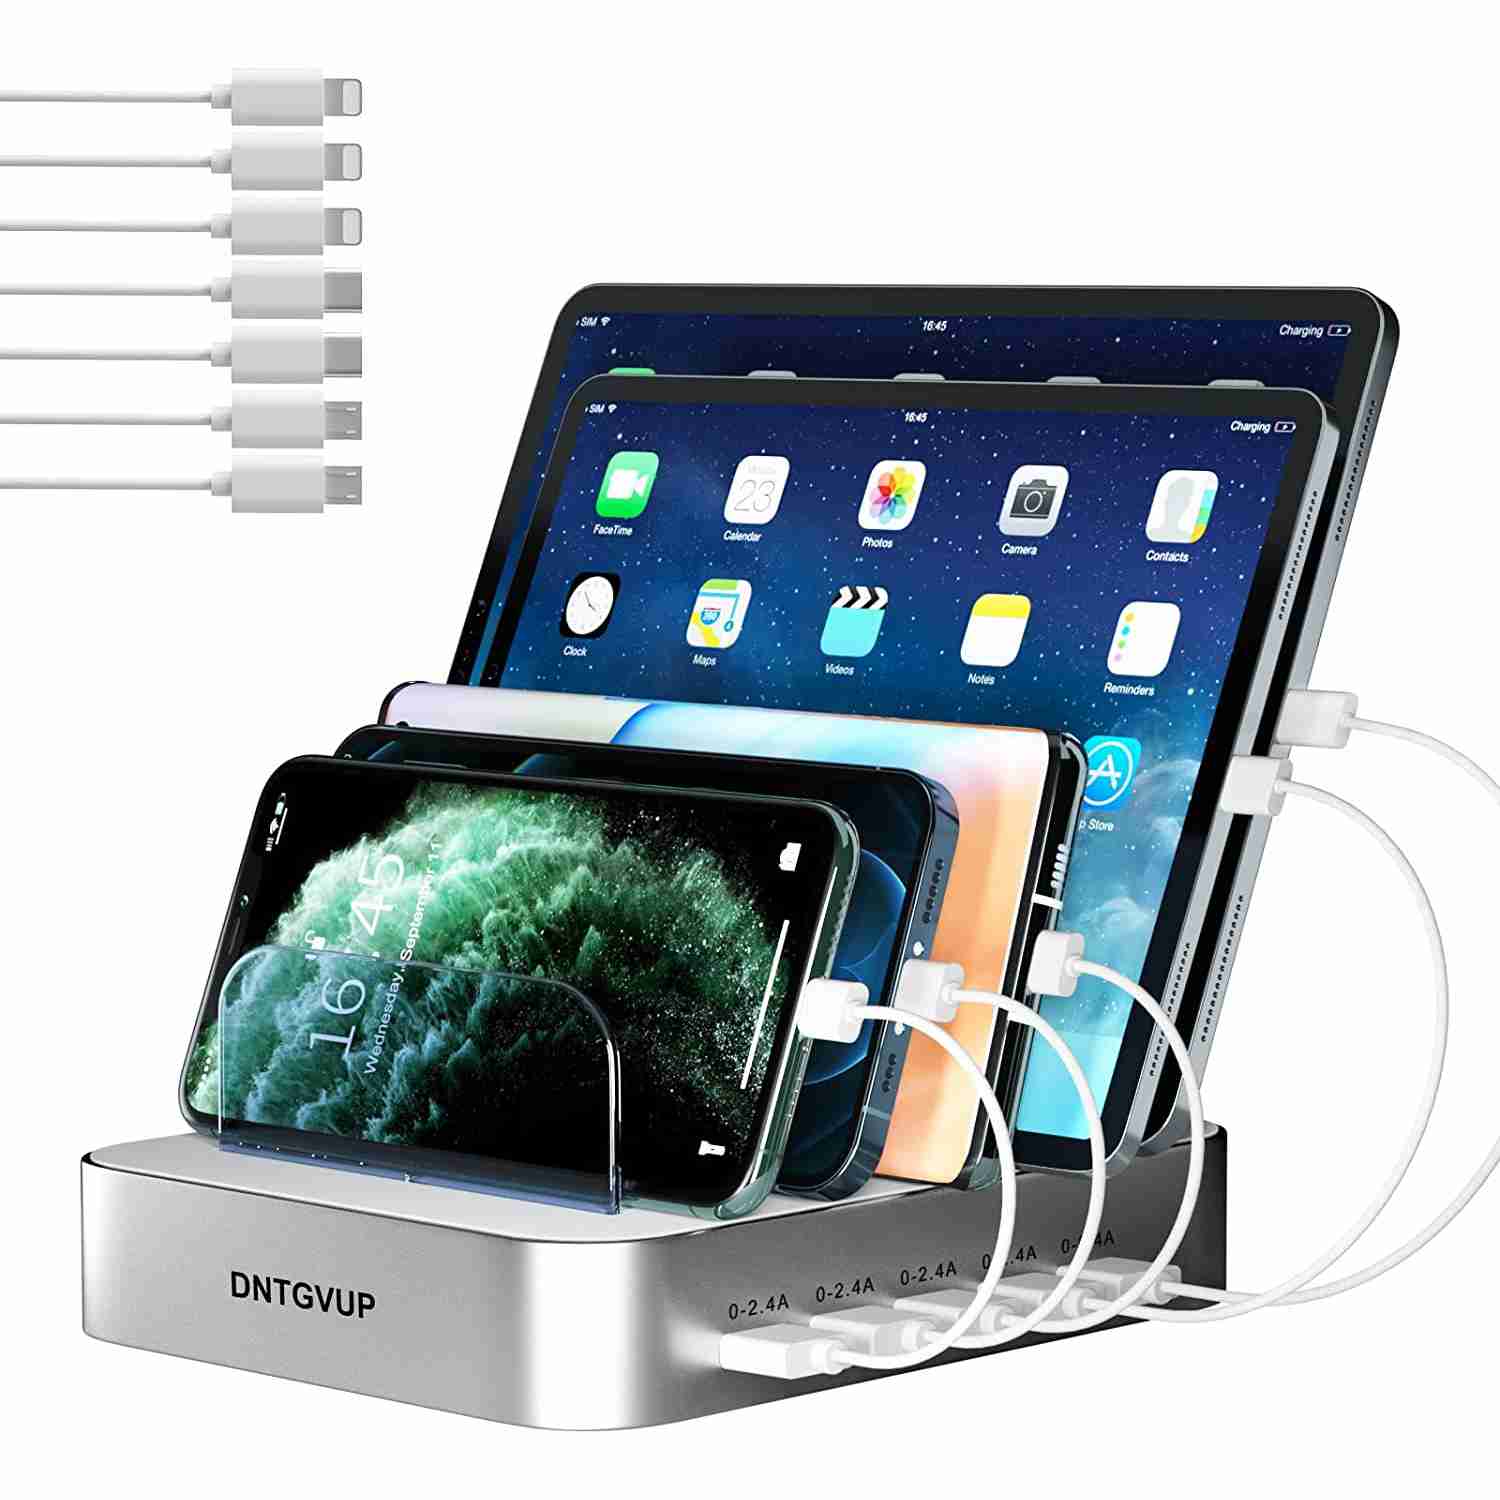 charging-station-for-multiple-devices-dntgvup-5-port-multi with discount code